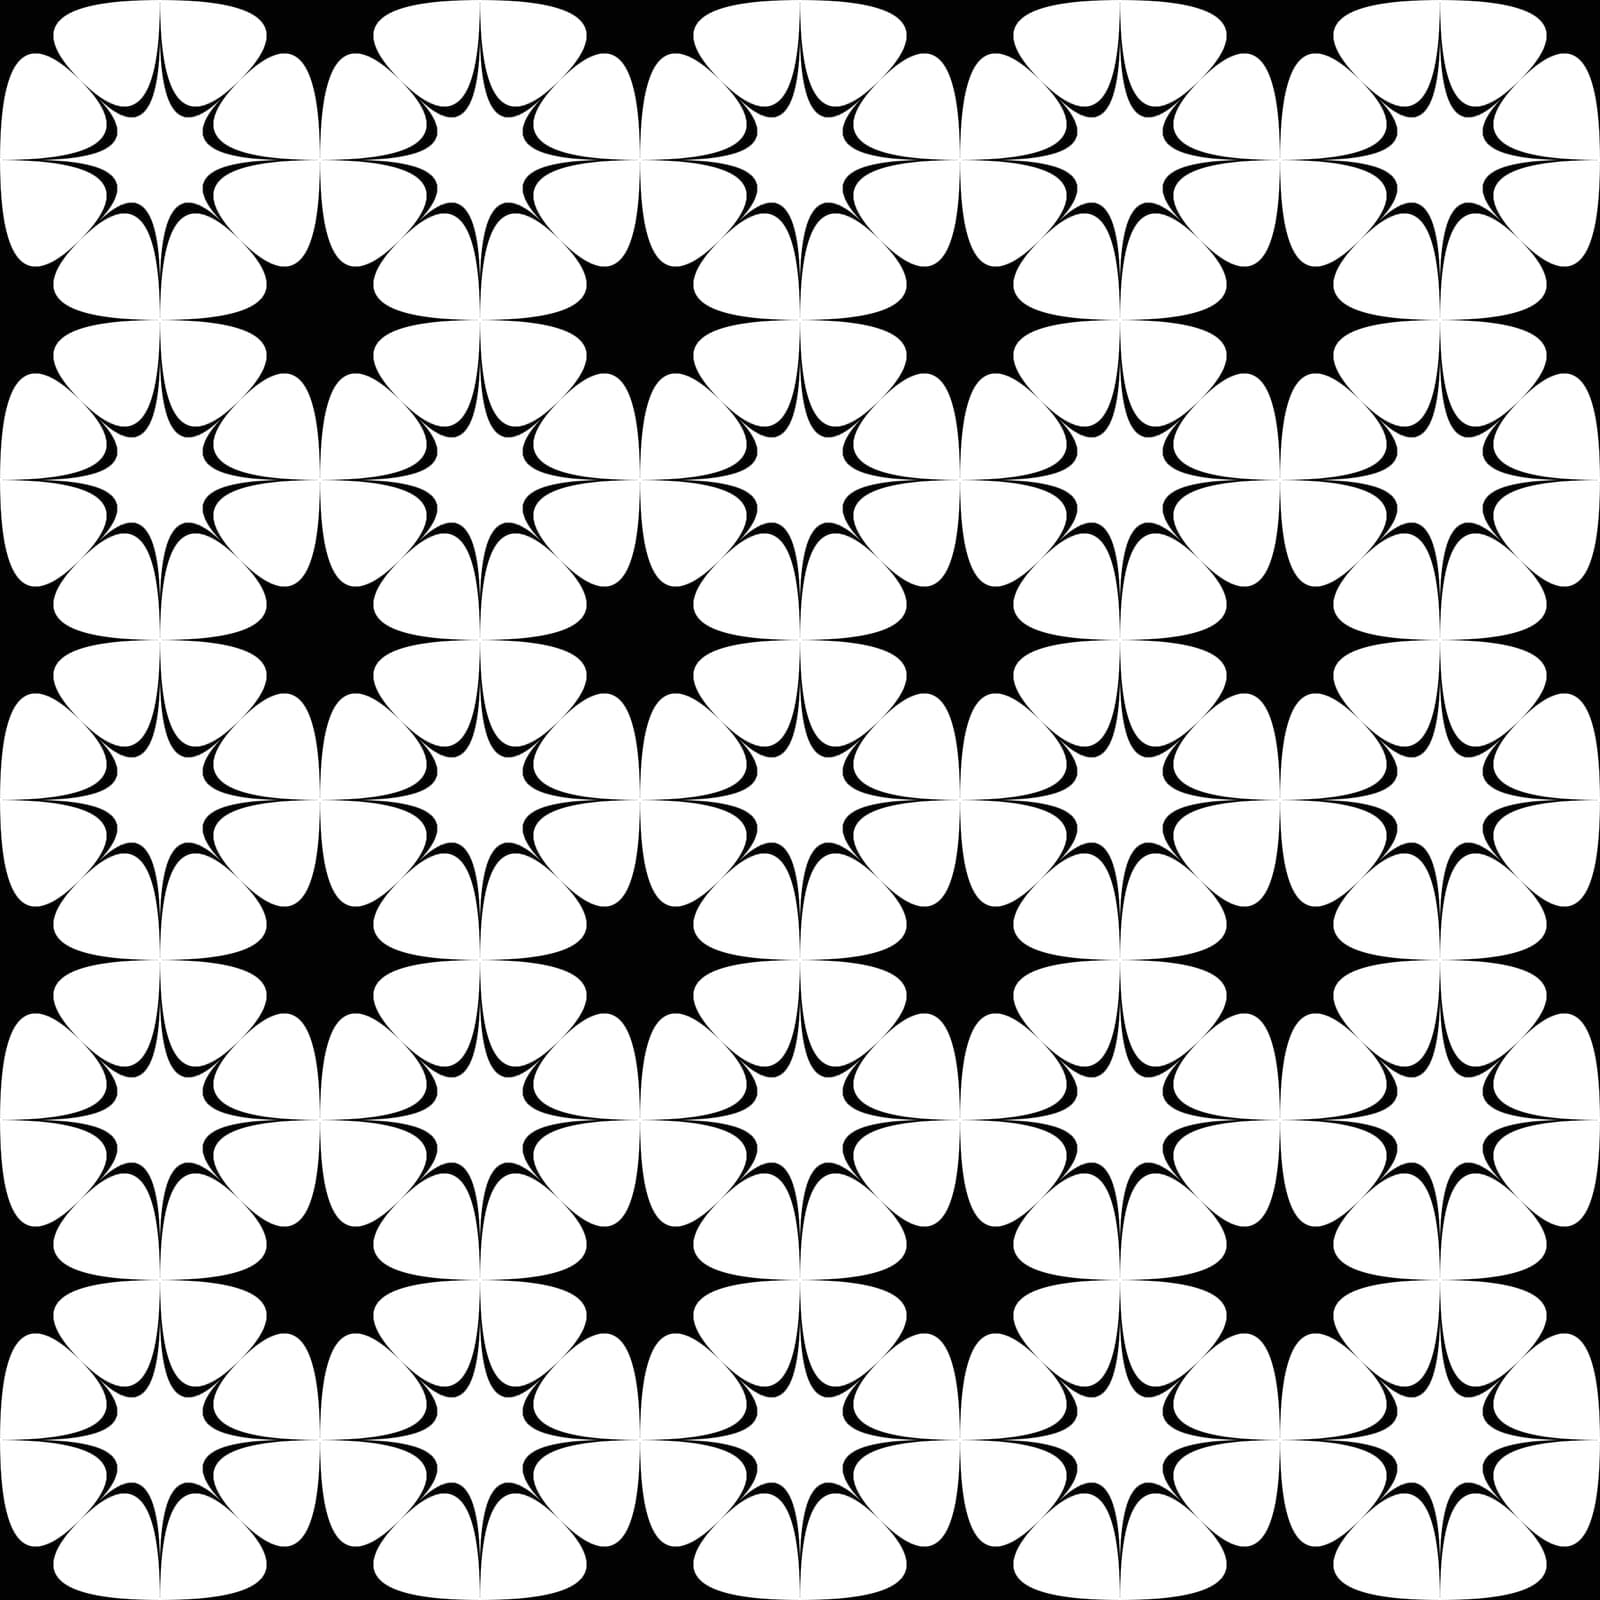 fancy,curved,star,background,line,pattern,presentation,arc,white,modern,paper,decor,design,repeat,motif,decoration,seamless,geometric,ornate,thorn,black,abstract,halftone,fabric,monochrome,geometry,arch,repetitive,octagram